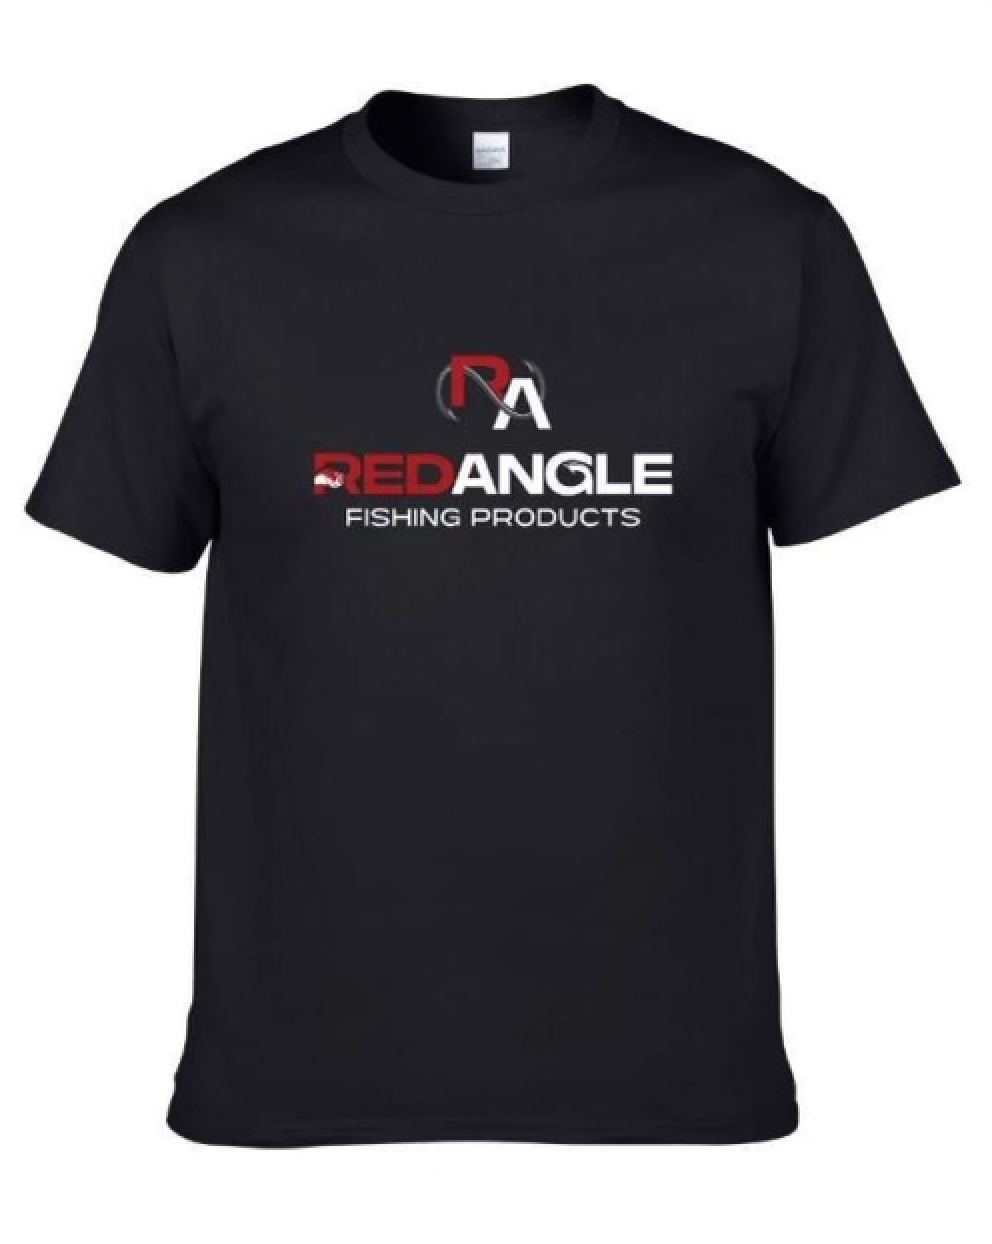 Fishing T-Shirts - Red Angle Fishing Products